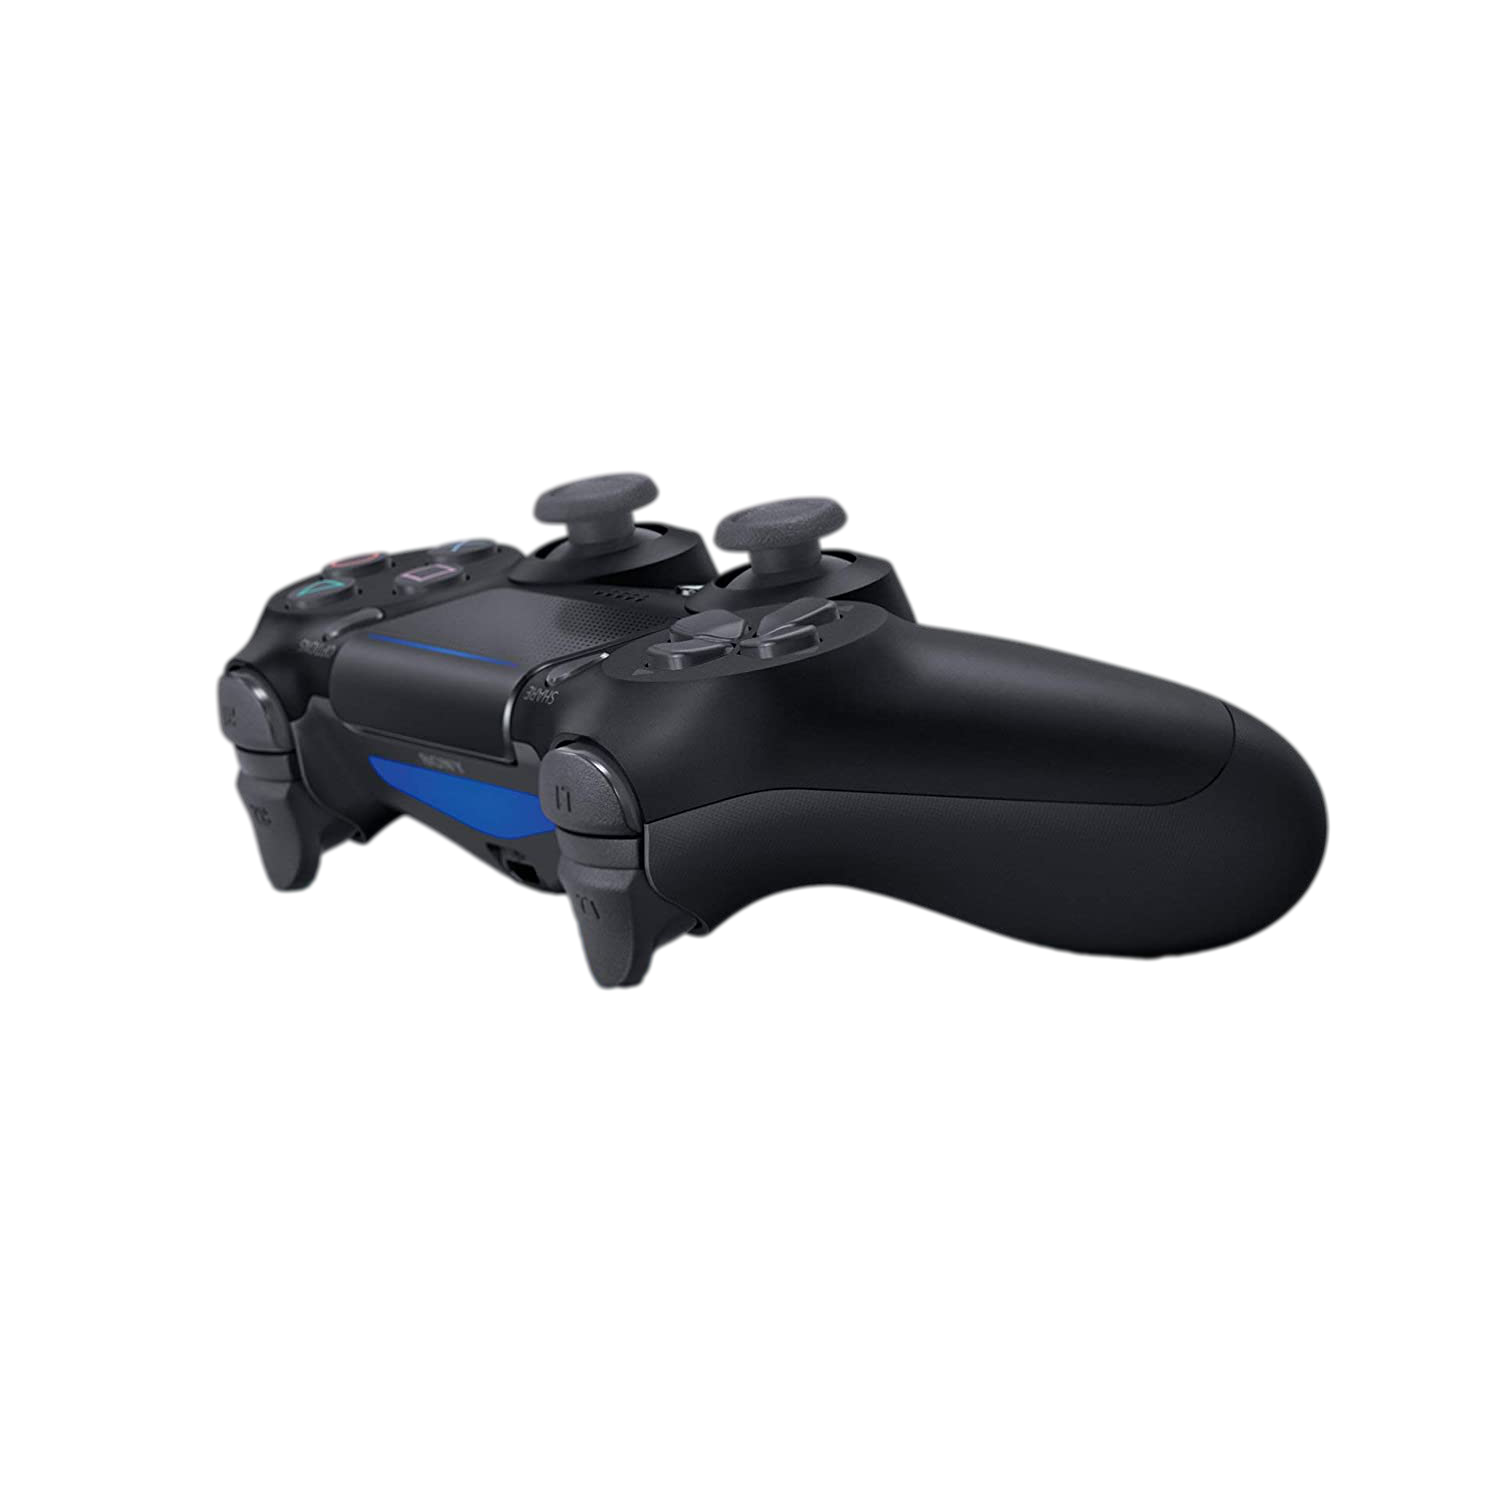 Sony-Official-PlayStation-DualShock-4-Controller-Black-2_cebe7ae0-8cd3-4d48-bf37-9bf90a58f38d